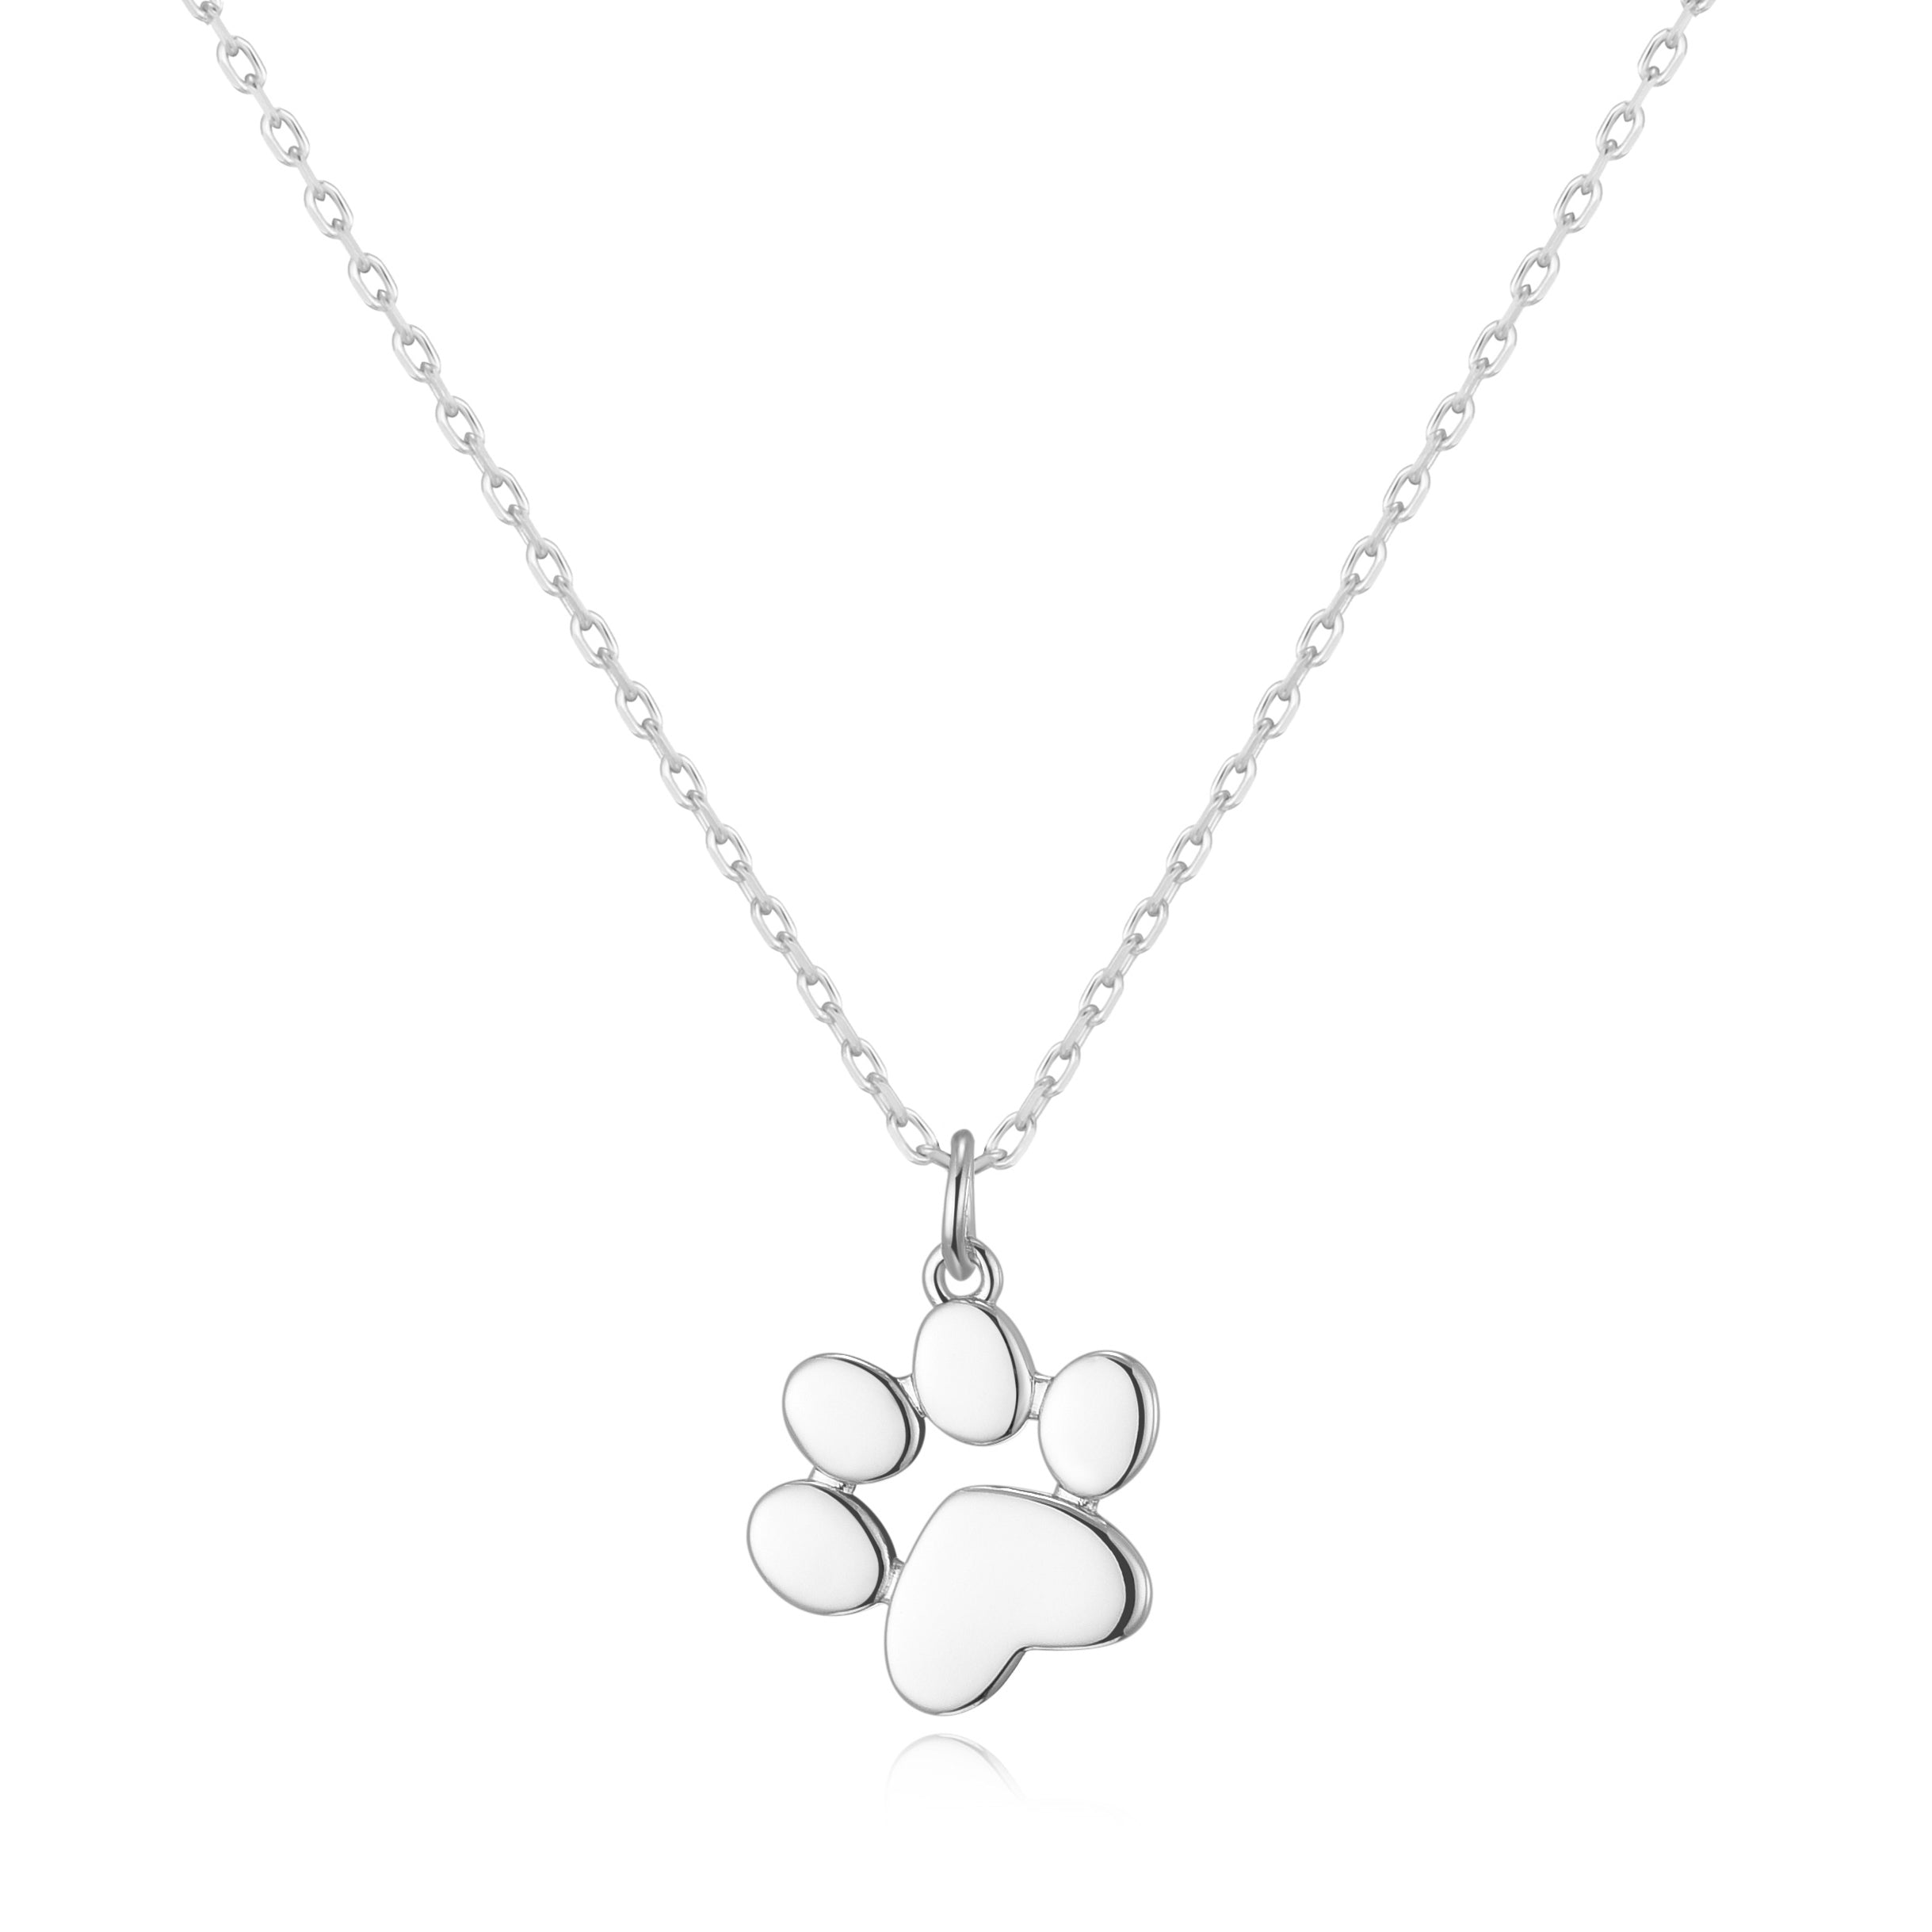 Silver Plated Dog Paw Necklace by Philip Jones Jewellery